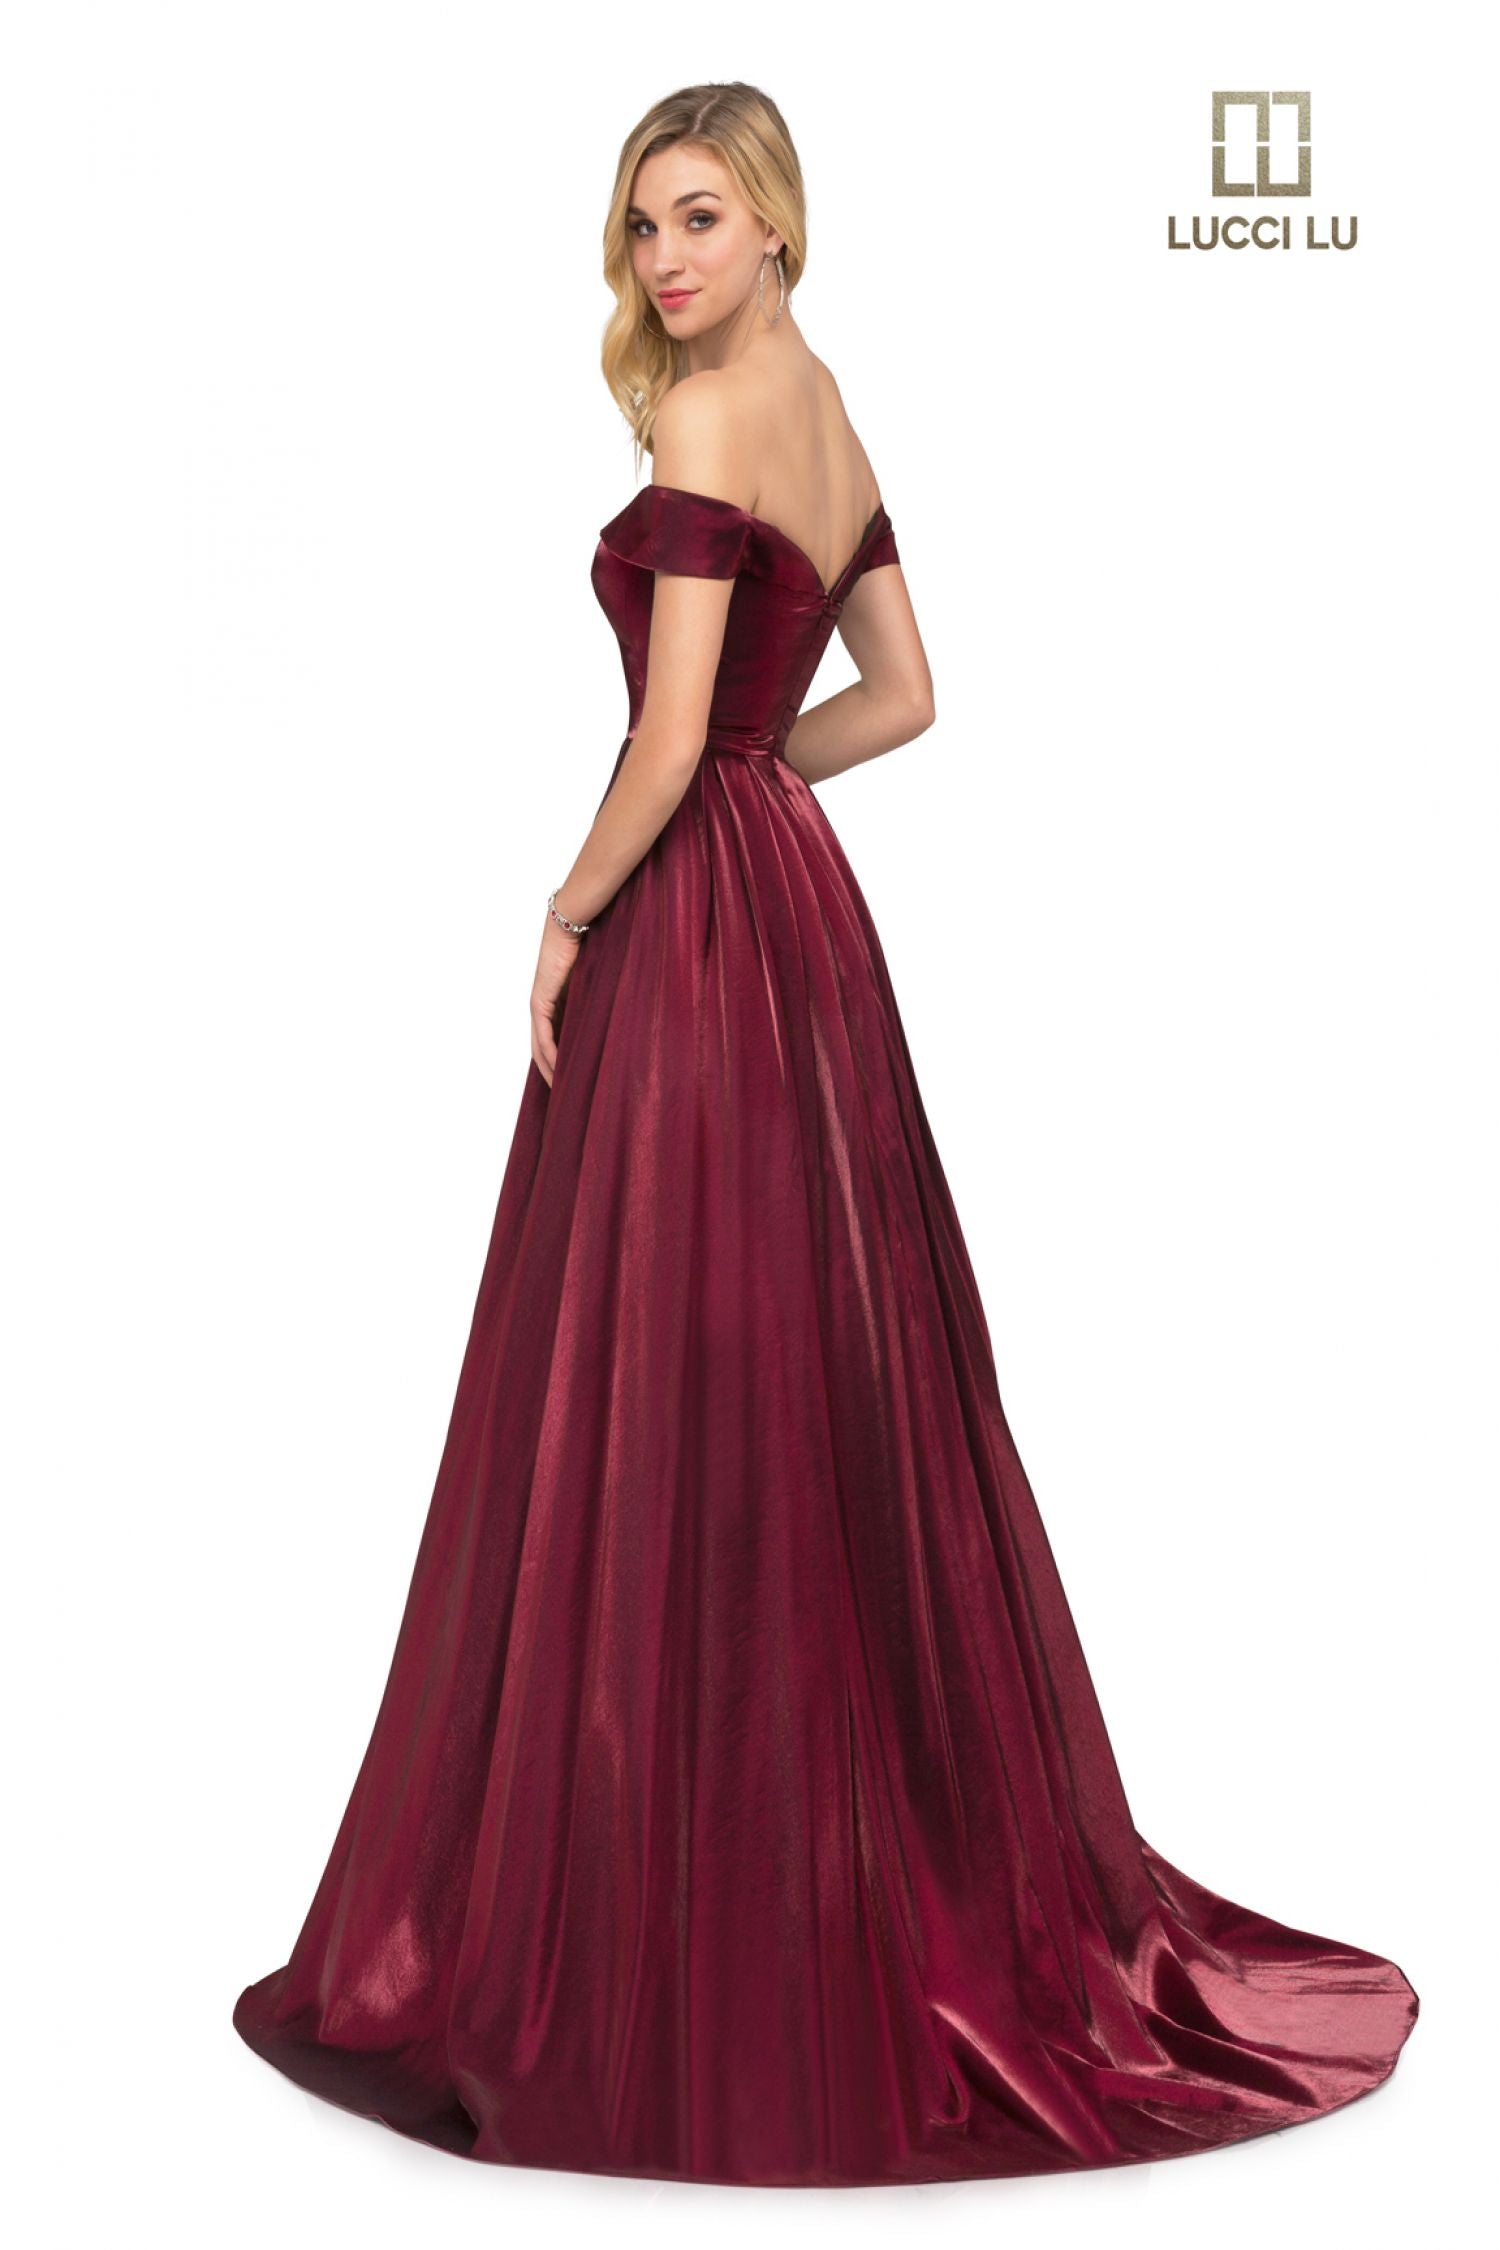 Lucci Lu 28063 Size 14 Claret Formal A Line off the shoulder evening gown Prom Dress Satin off the shoulder Pockets  Available Color: Claret  Available Size: 14